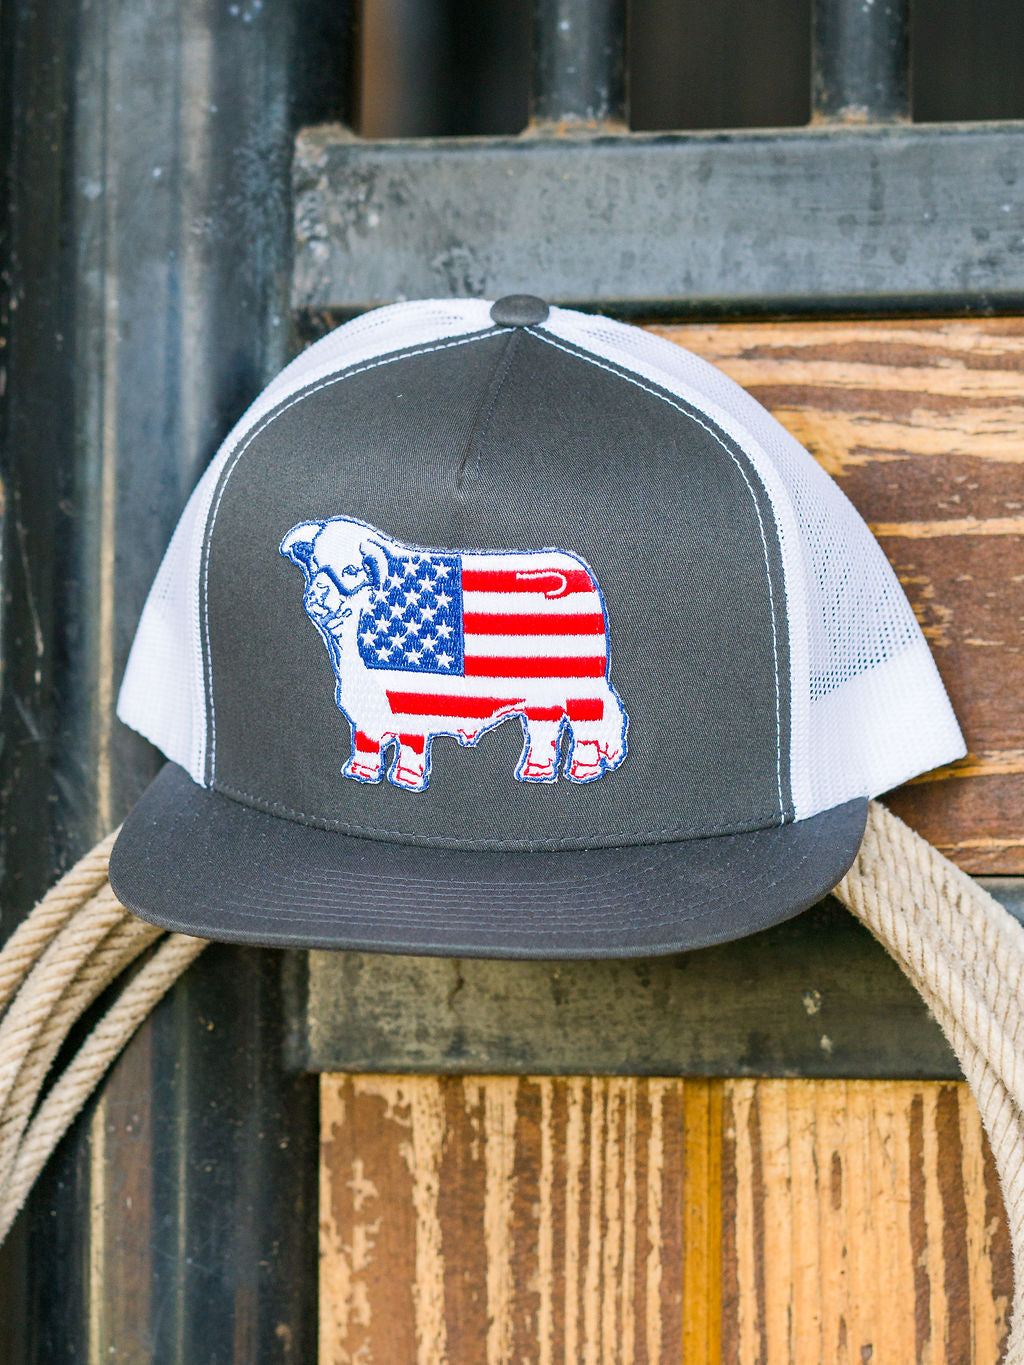 Jays' new U.S. flag cap is a swing and a miss